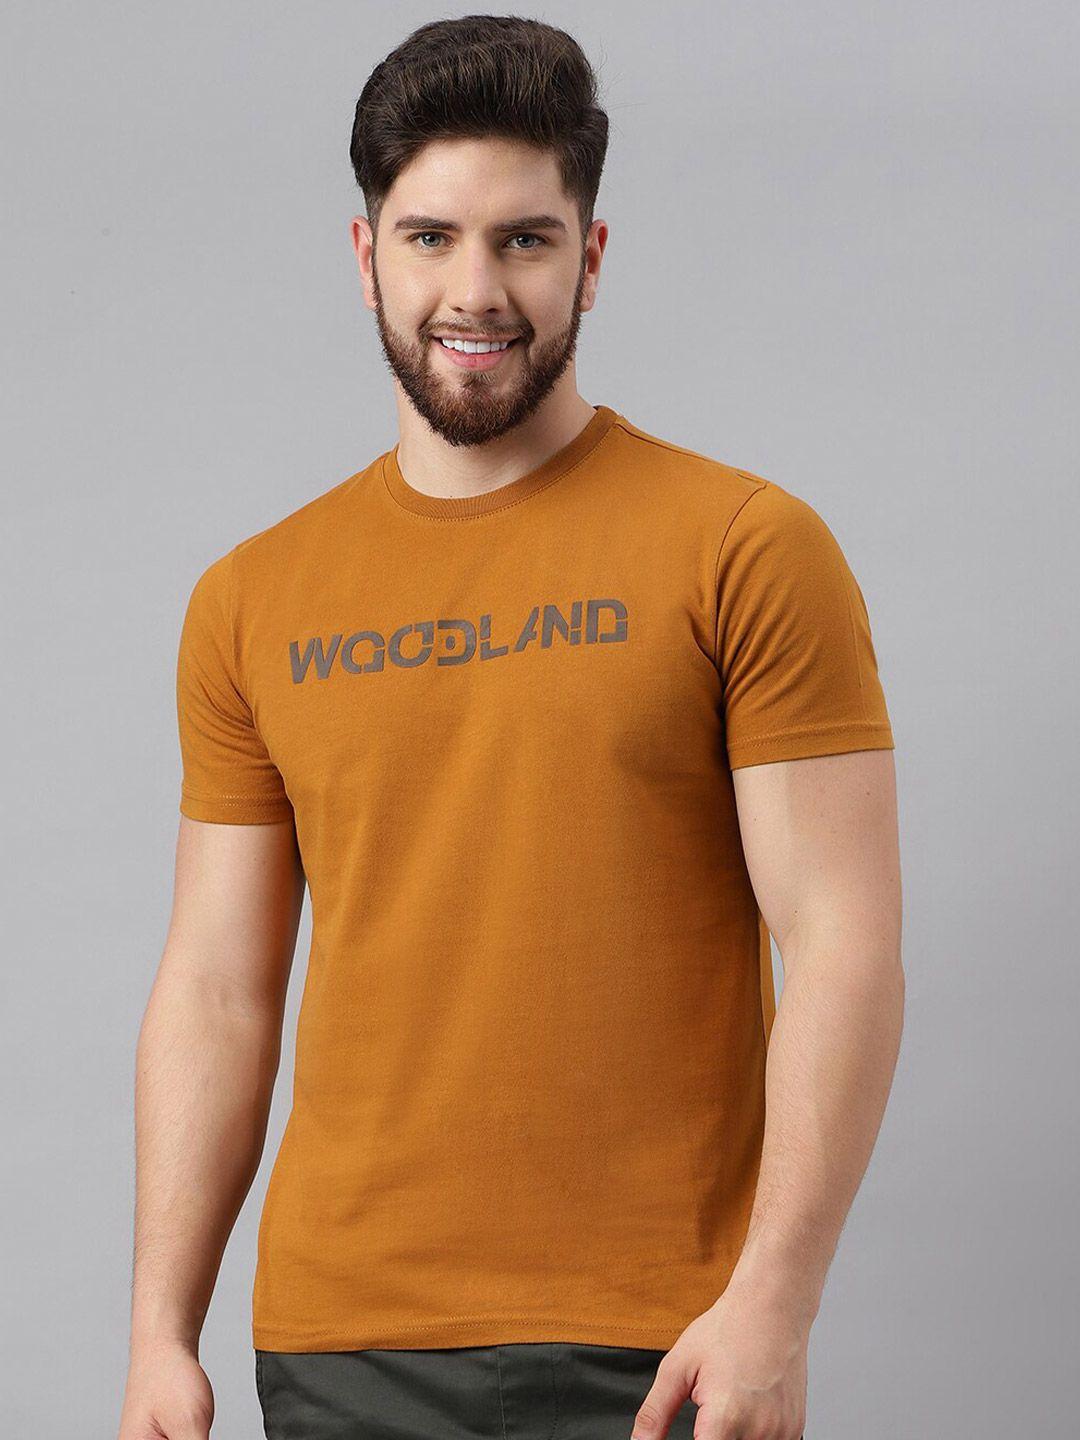 woodland-typography-printed-pure-cotton-casual-t-shirt